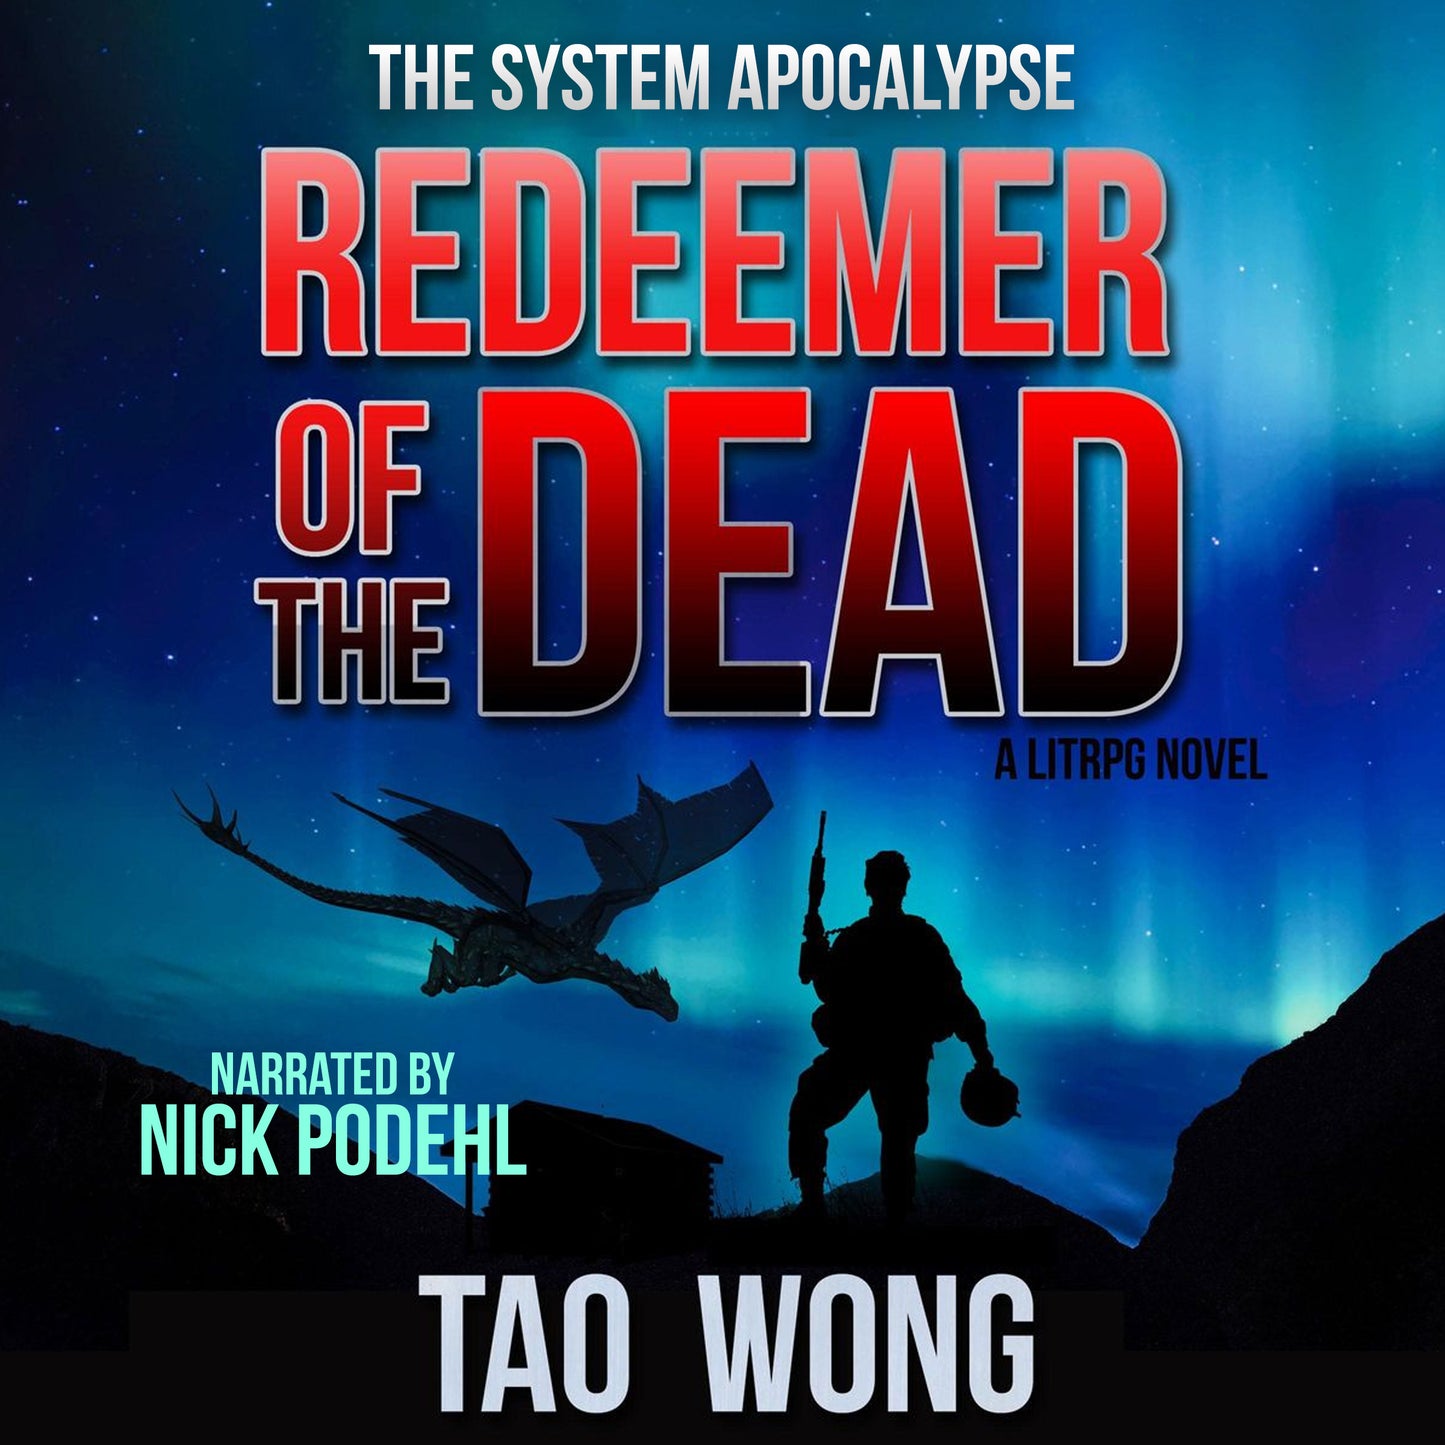 Redeemer of the Dead (The System Apocalypse #2)